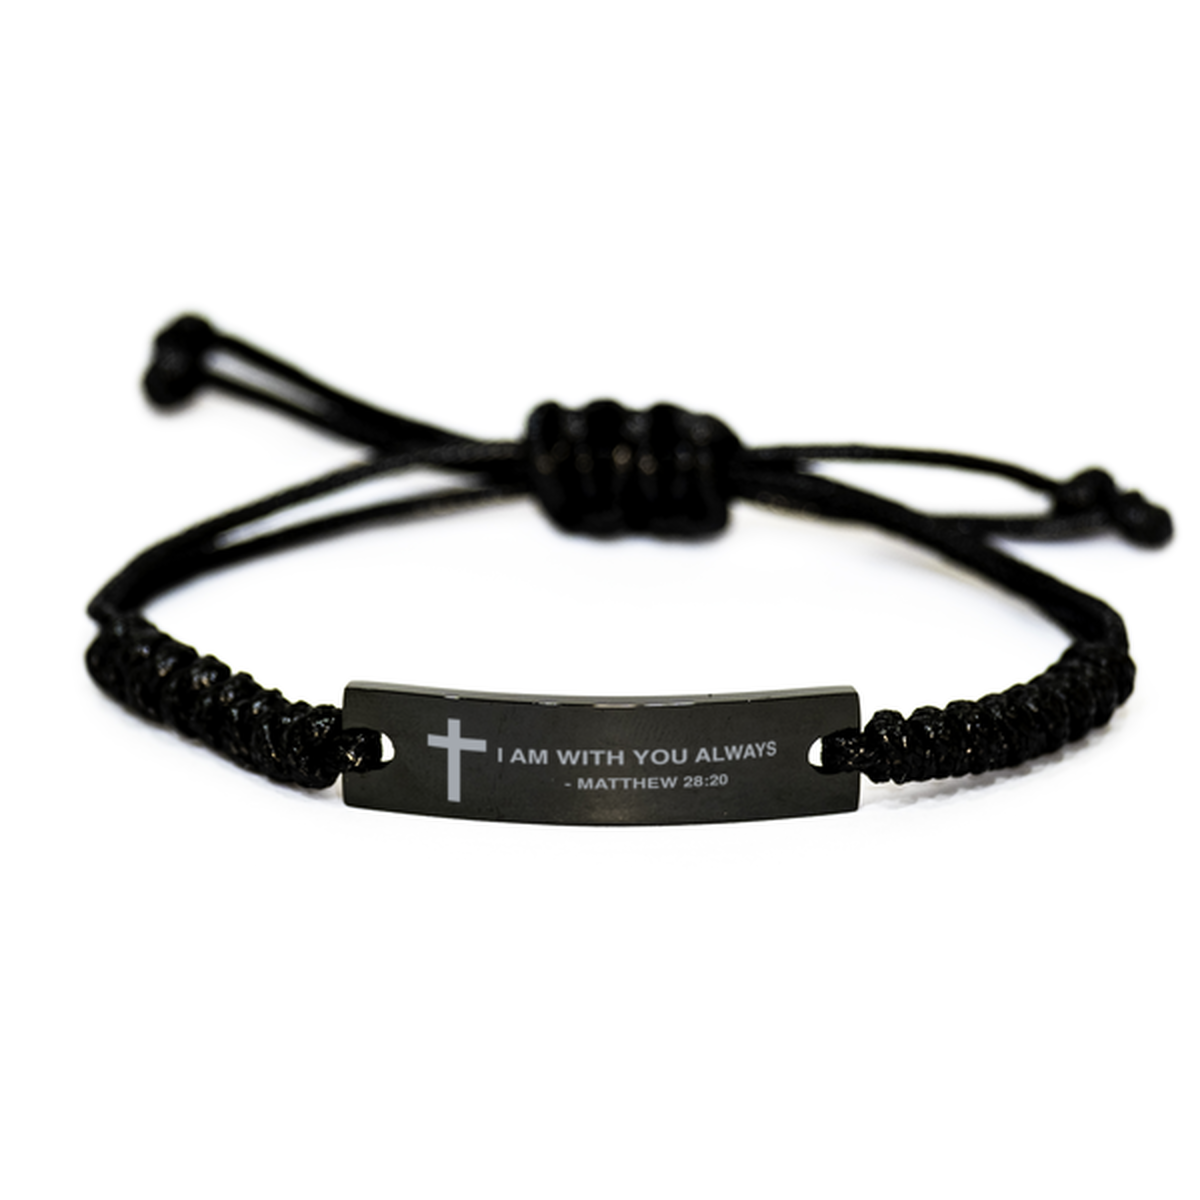 Bible Verse Rope Bracelet, I Am With You Always, Matthew 28:20, Inspirational Christian Gifts For Men Women